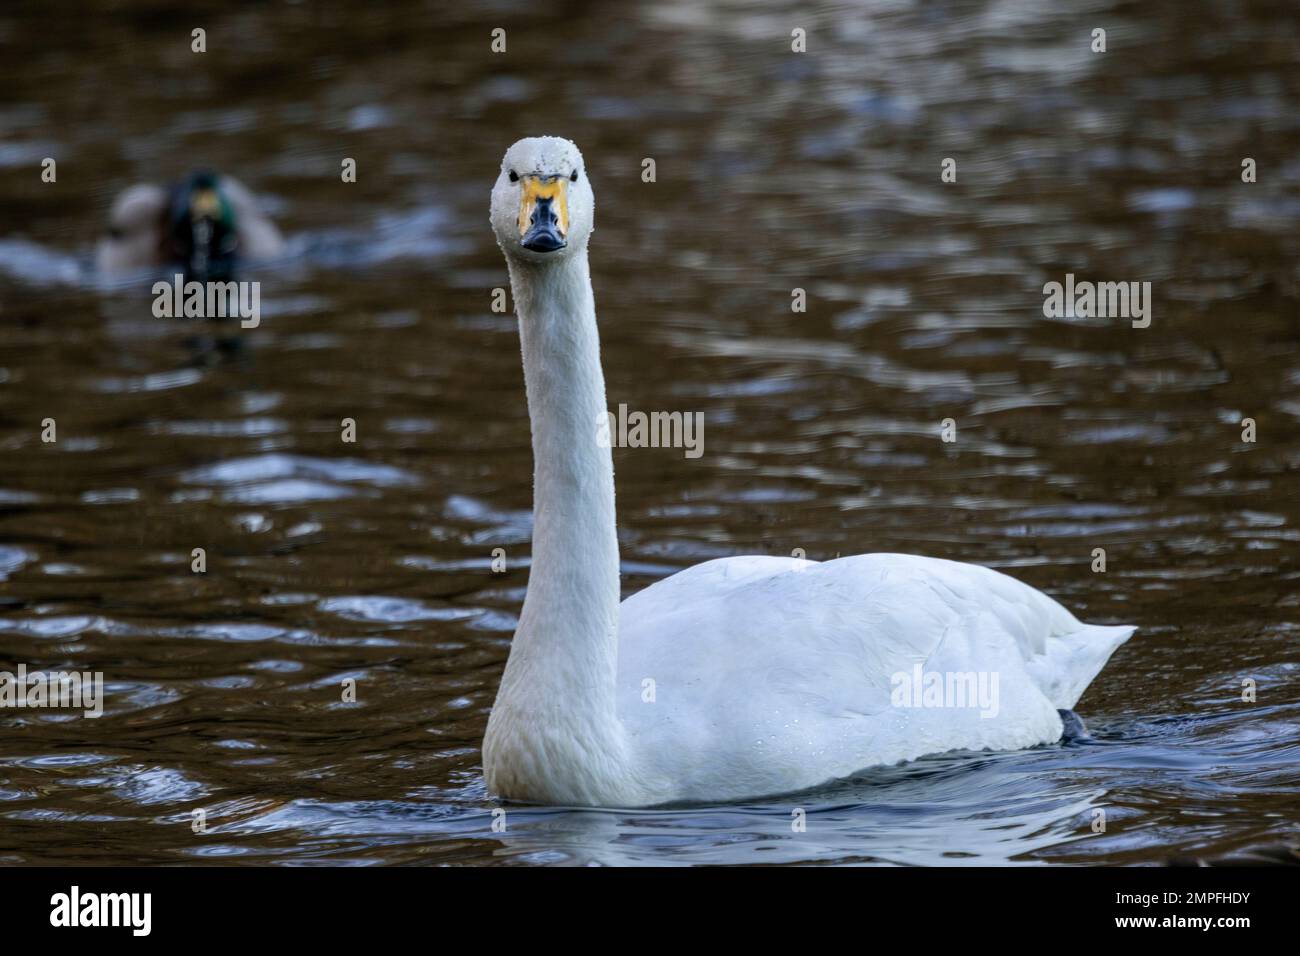 Slightly smaller than the resident Mute Swan, the Whooper normally carries its neck more upright, and the beak is yellow rather than orange. Stock Photo